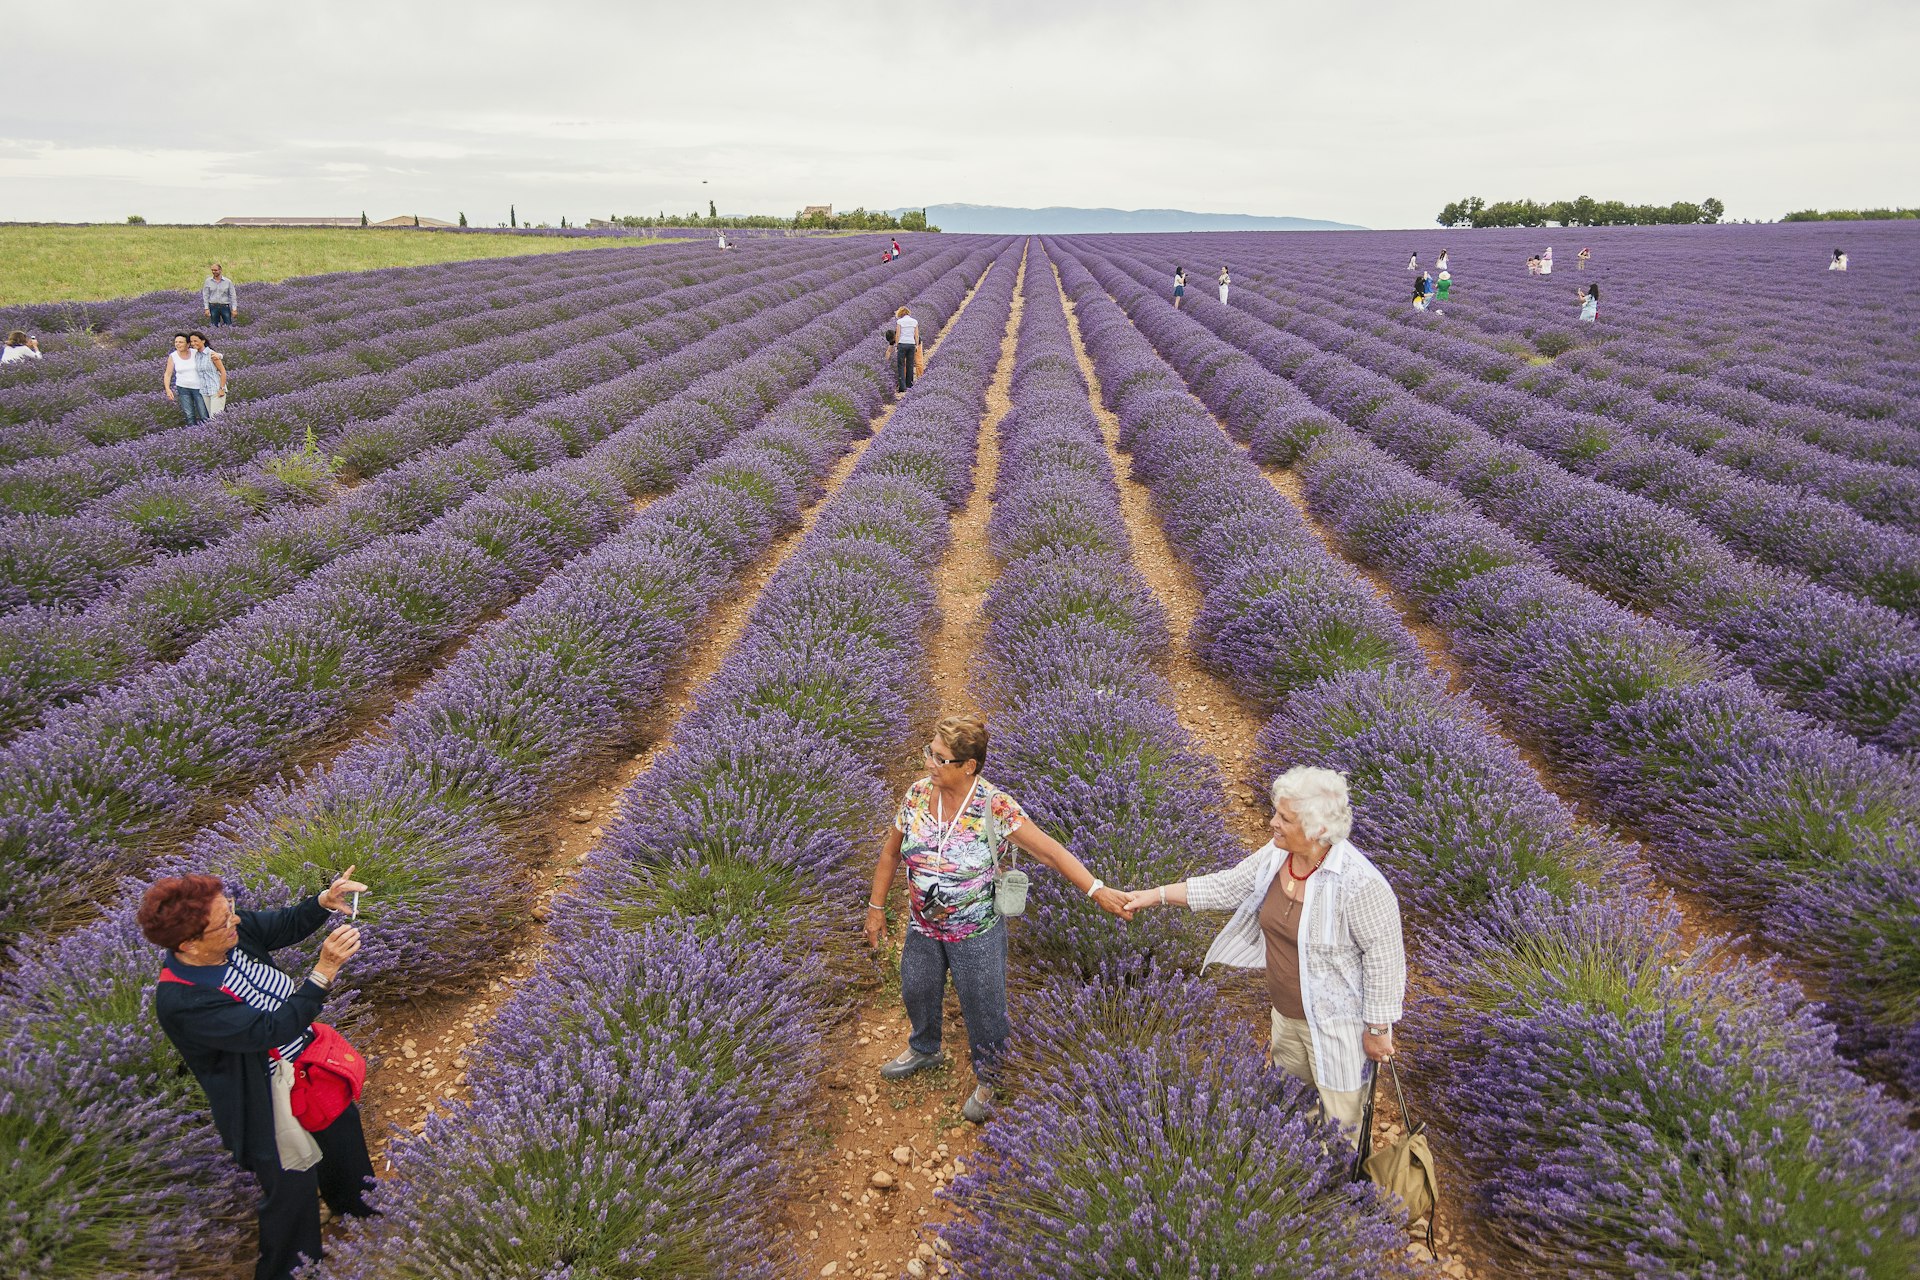 Visitors walk between rows of lavender plants near Valensole in Provence, France